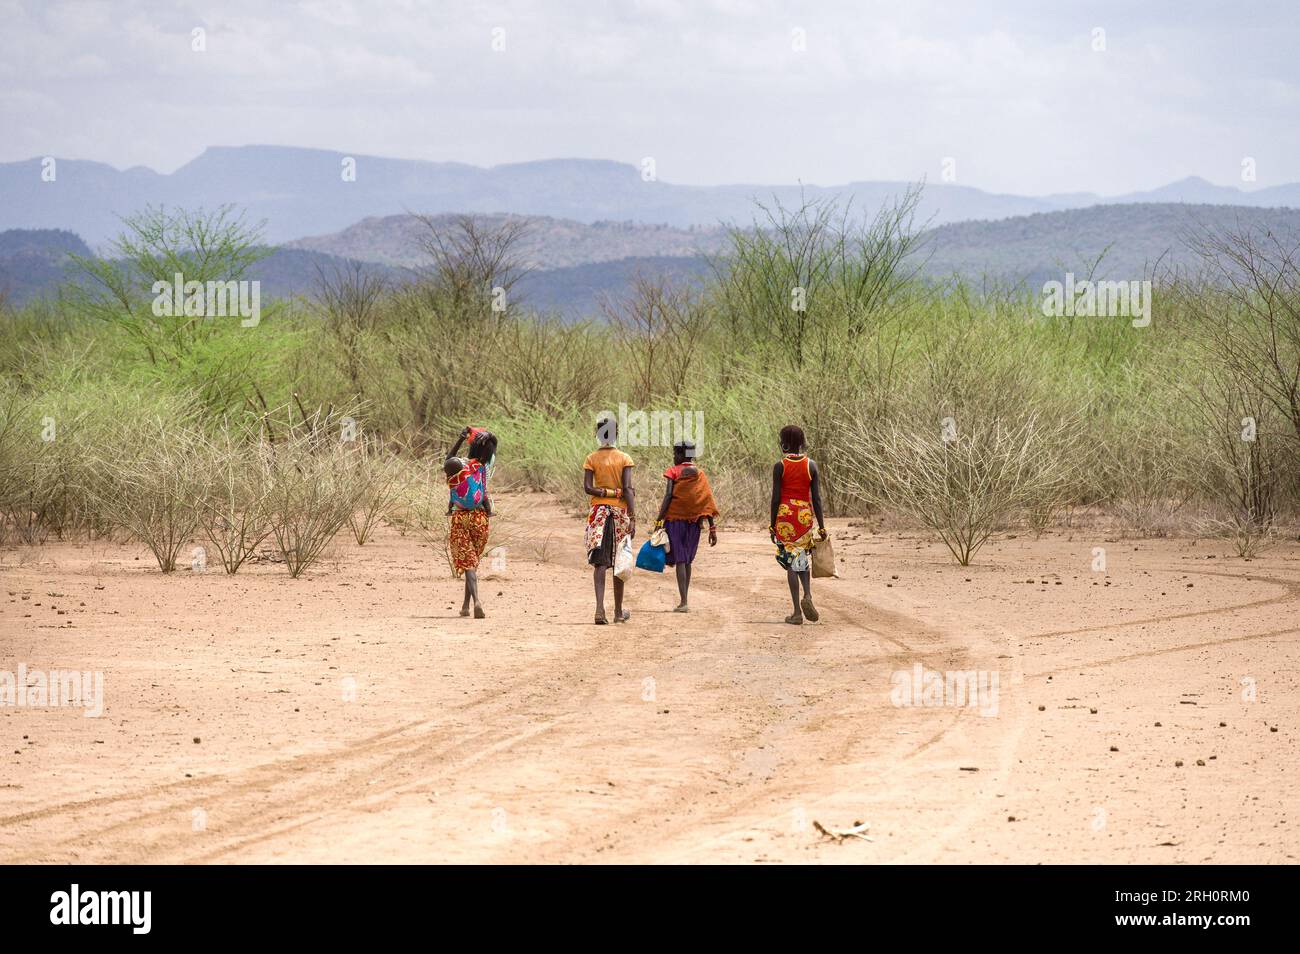 A group of young Pokot women walk down a dusty track towards large bushes with hills in background, Pokot, Kenya Stock Photo